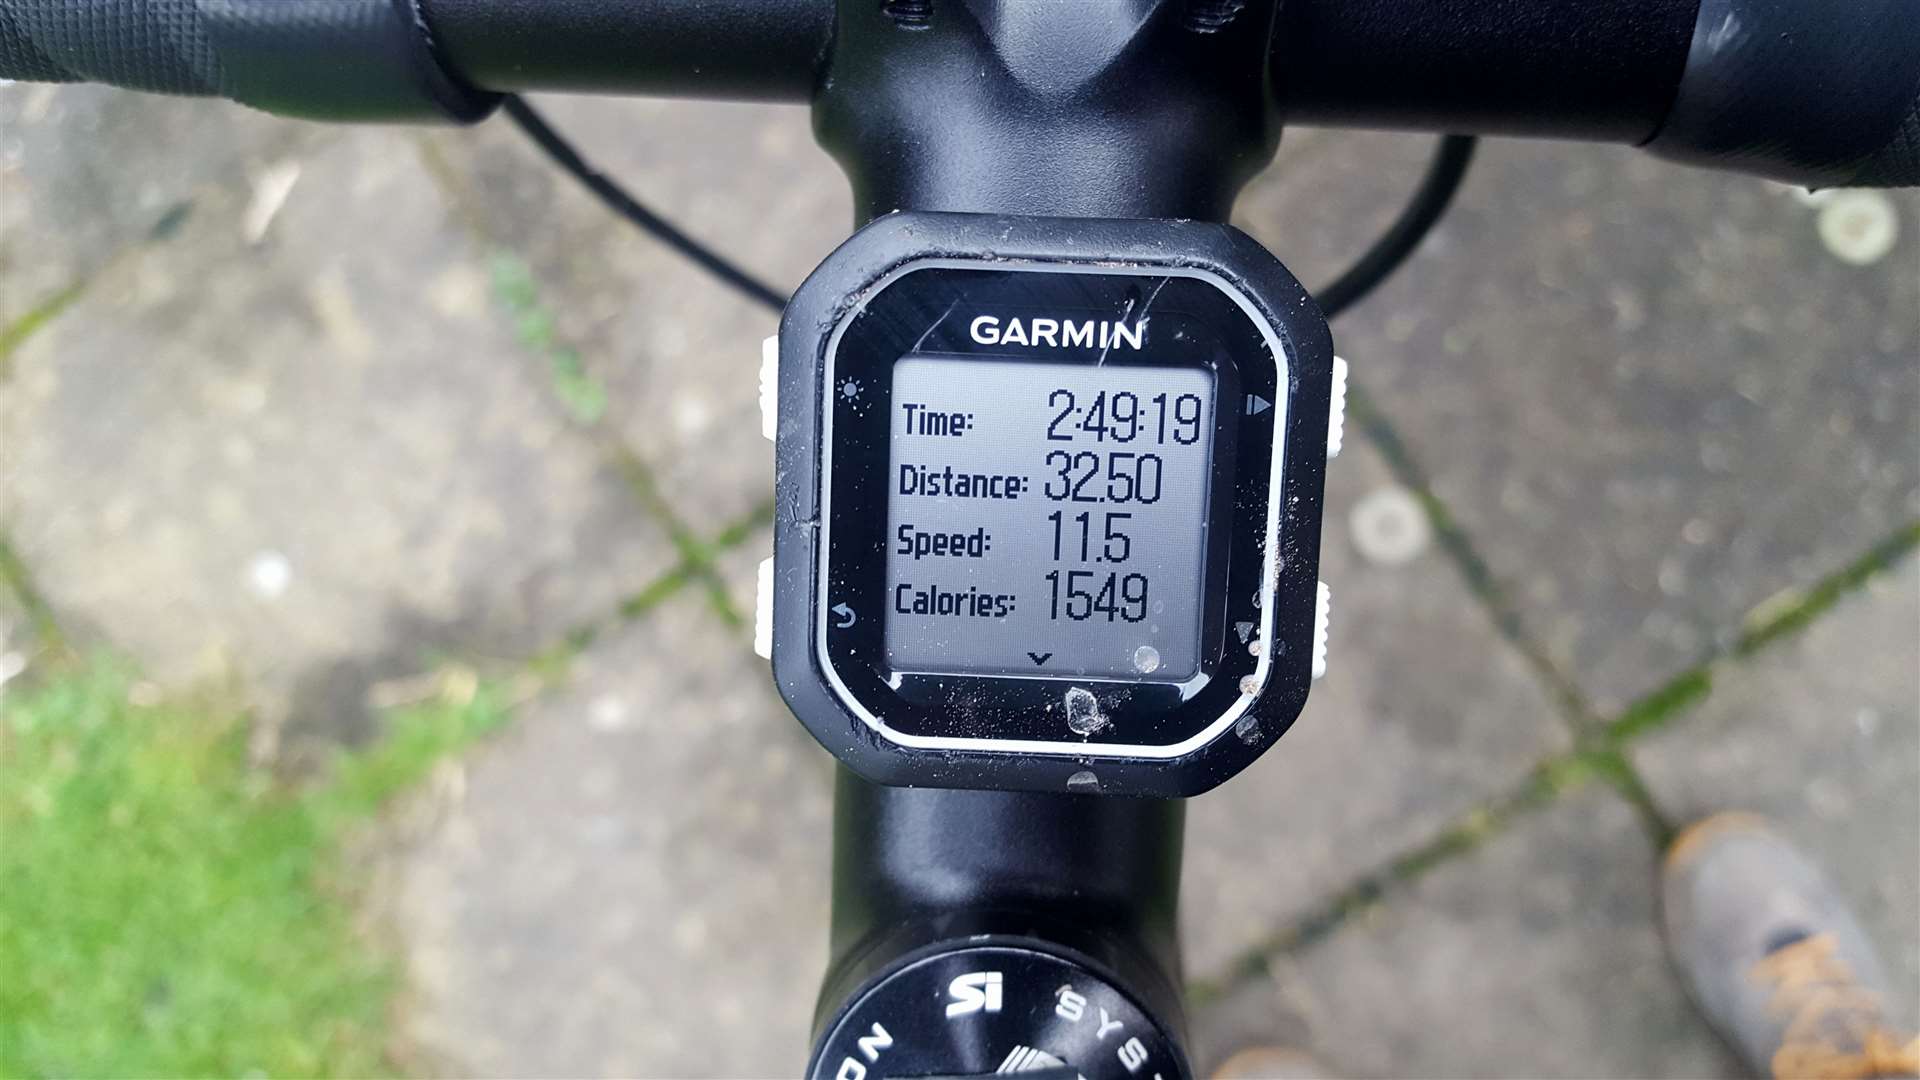 The Garmin tells the story - this ride is a cruise